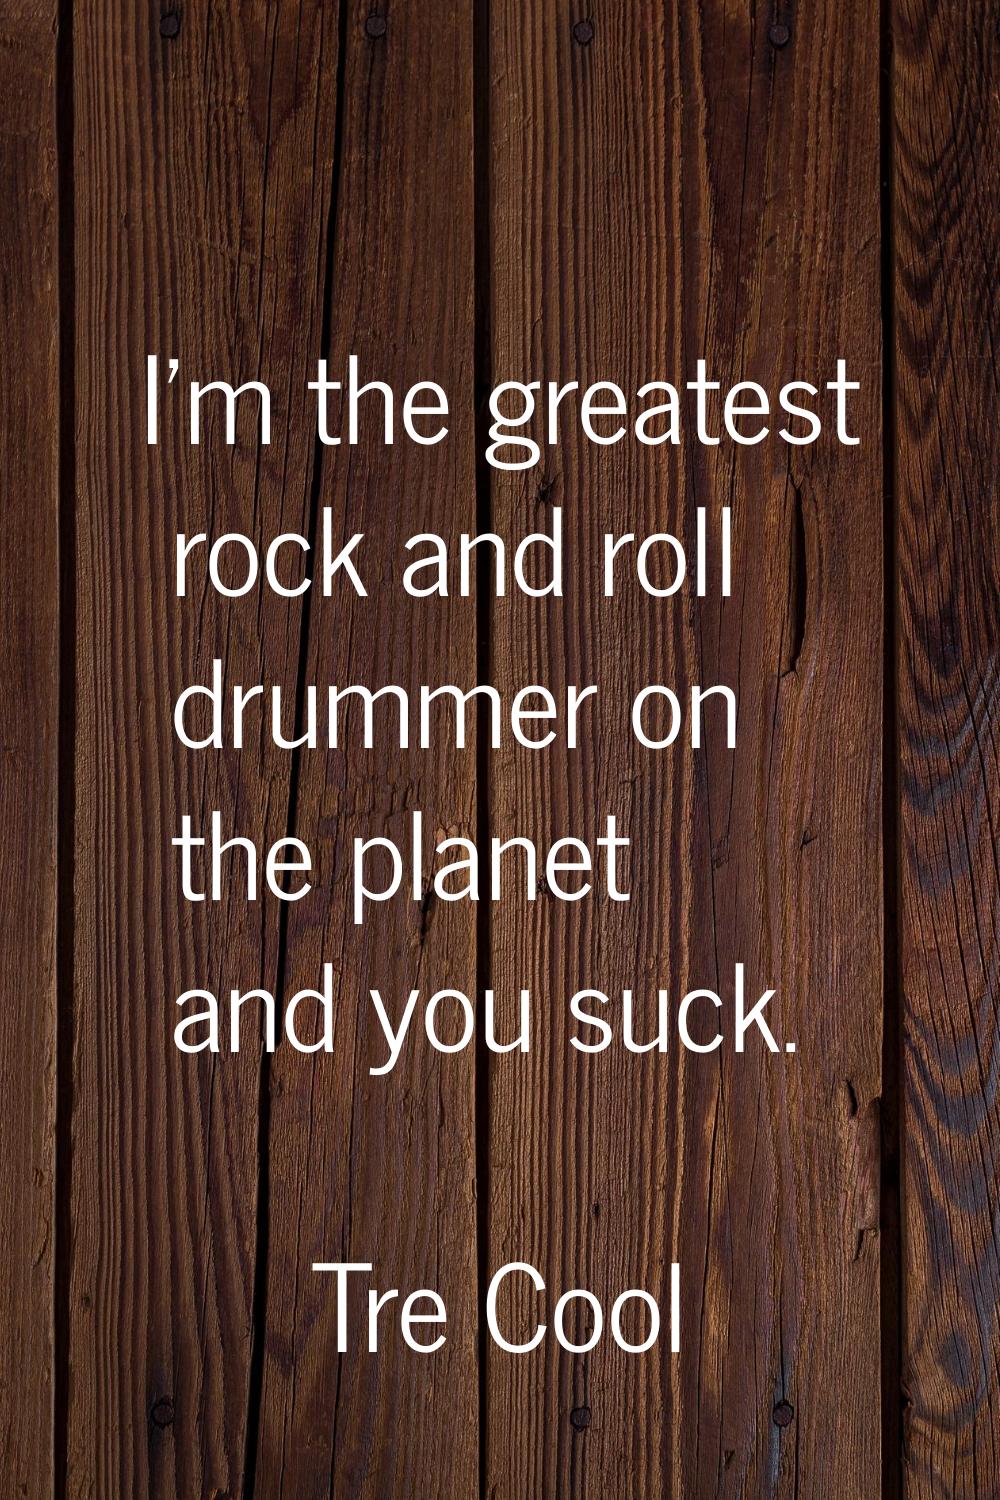 I'm the greatest rock and roll drummer on the planet and you suck.